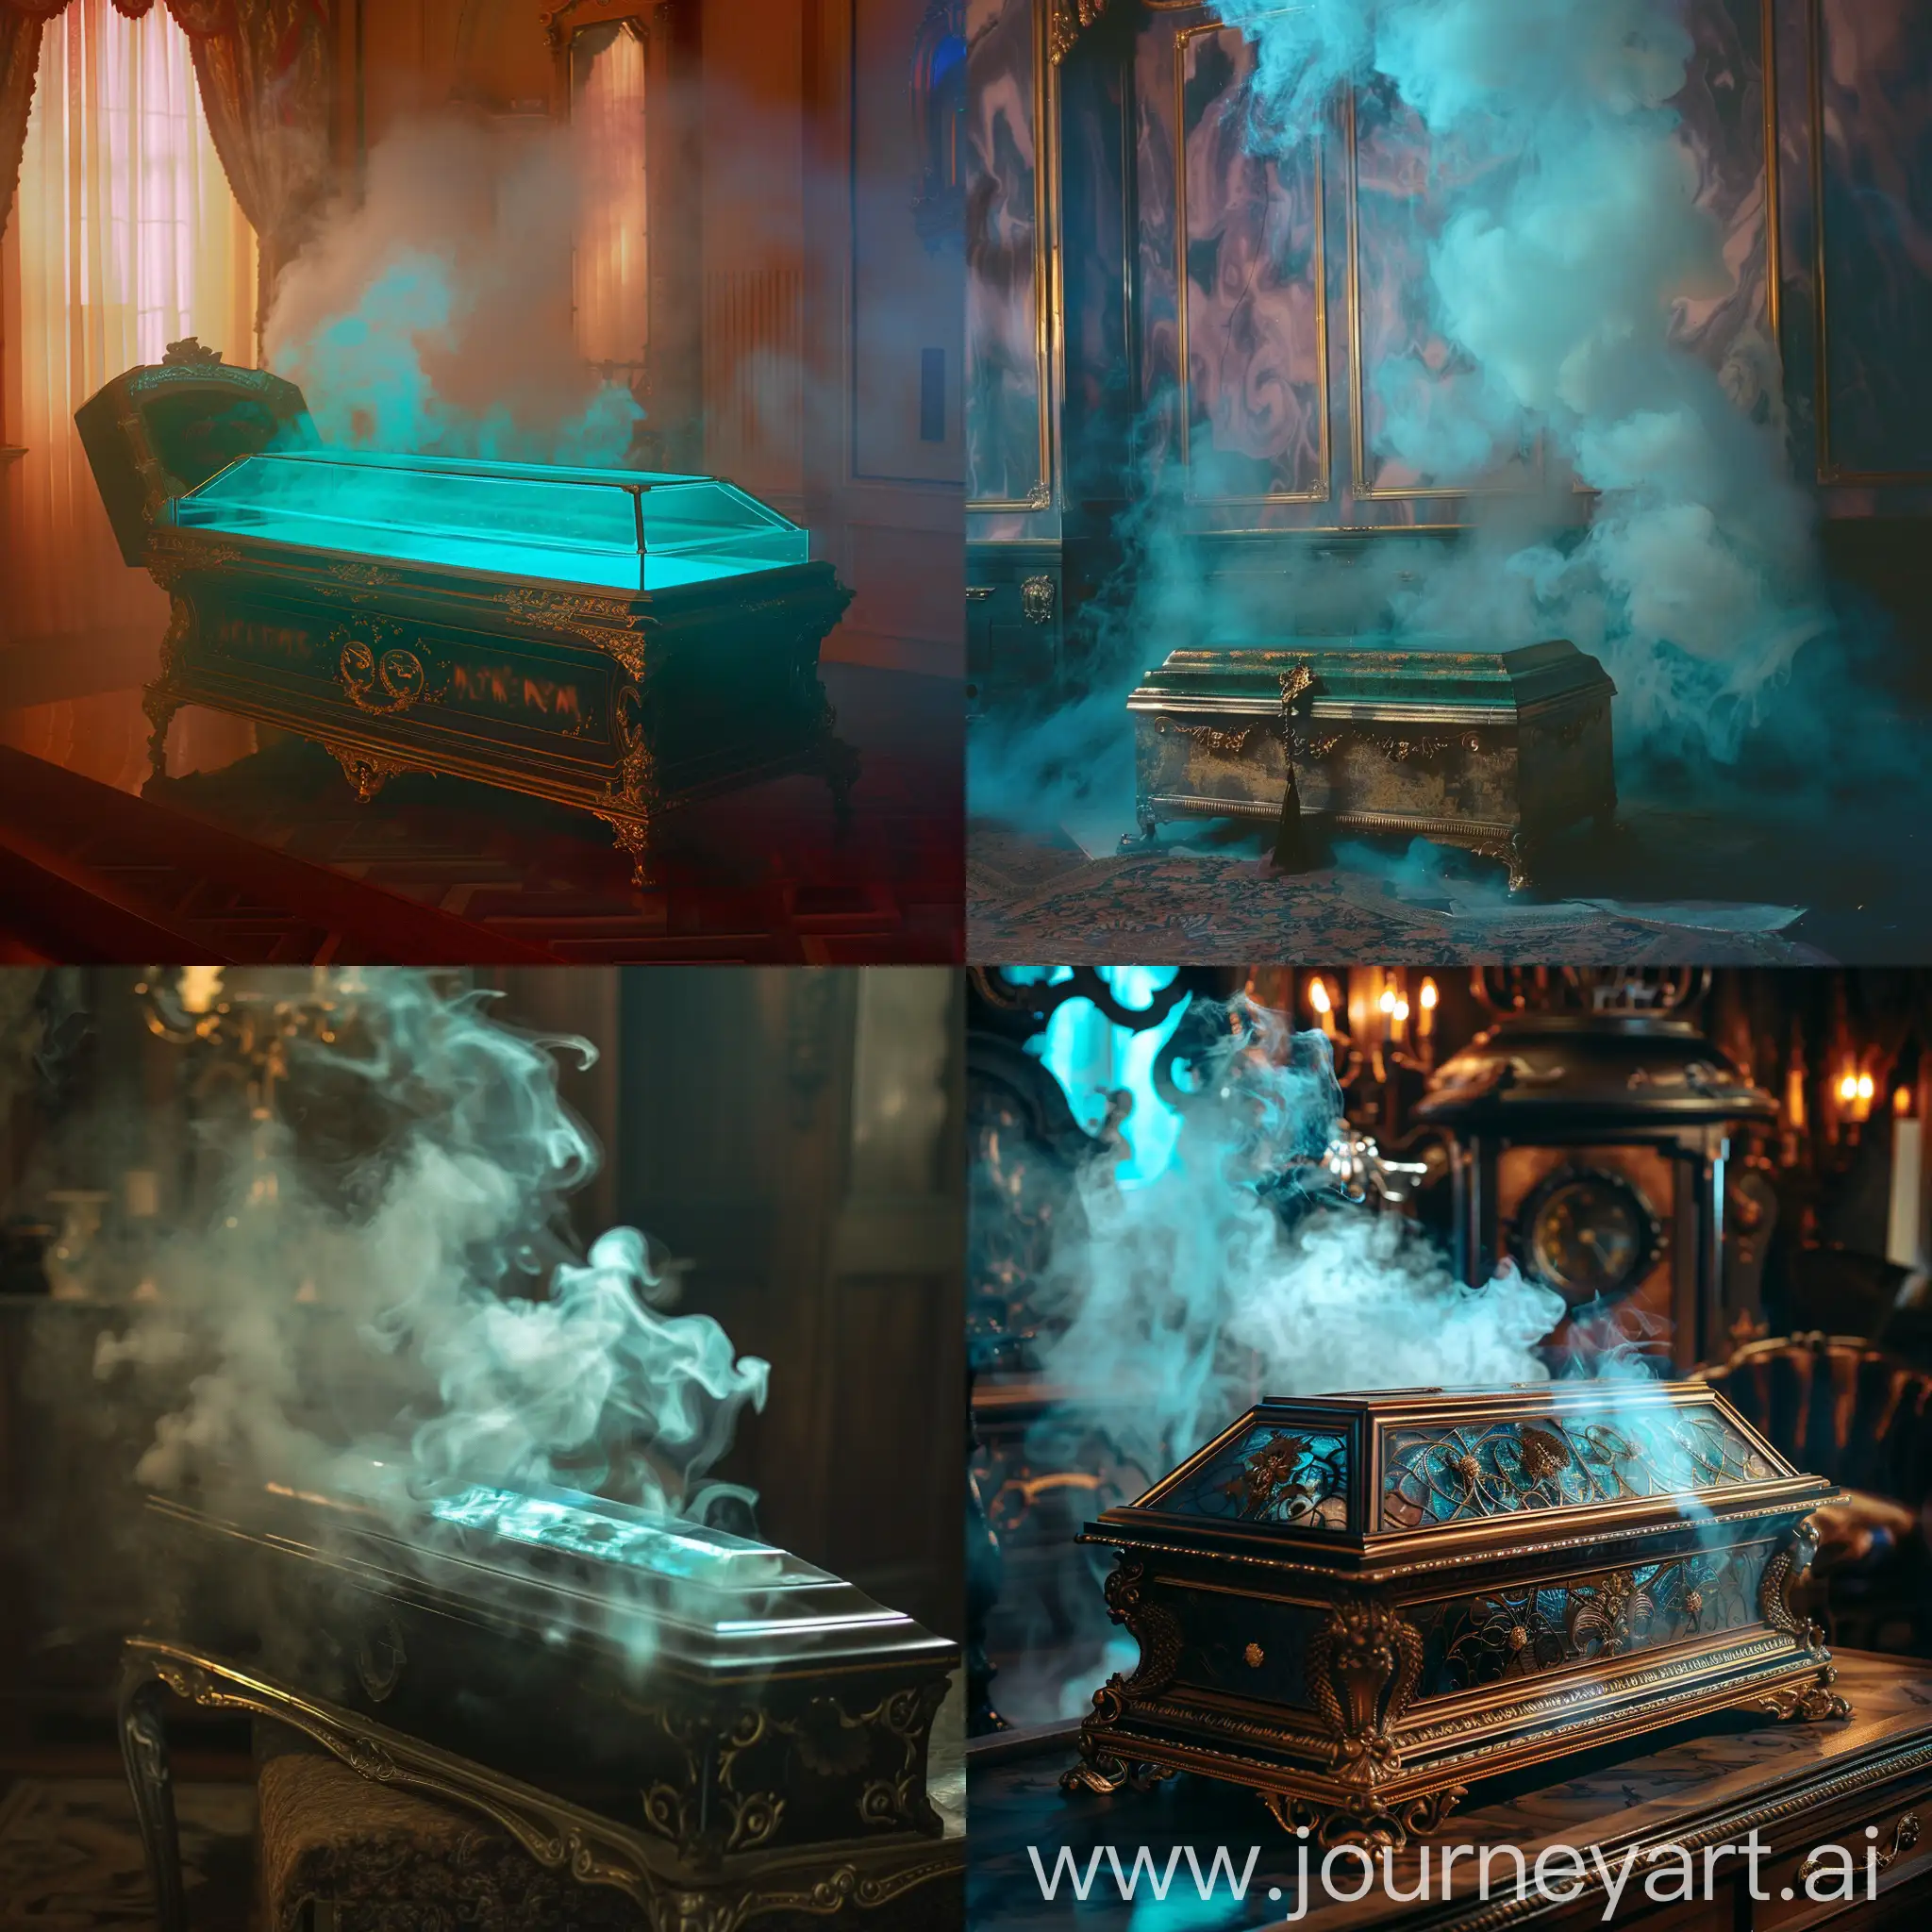 A Tiffany-colored coffin in an antique setting. from which the smoke is coming